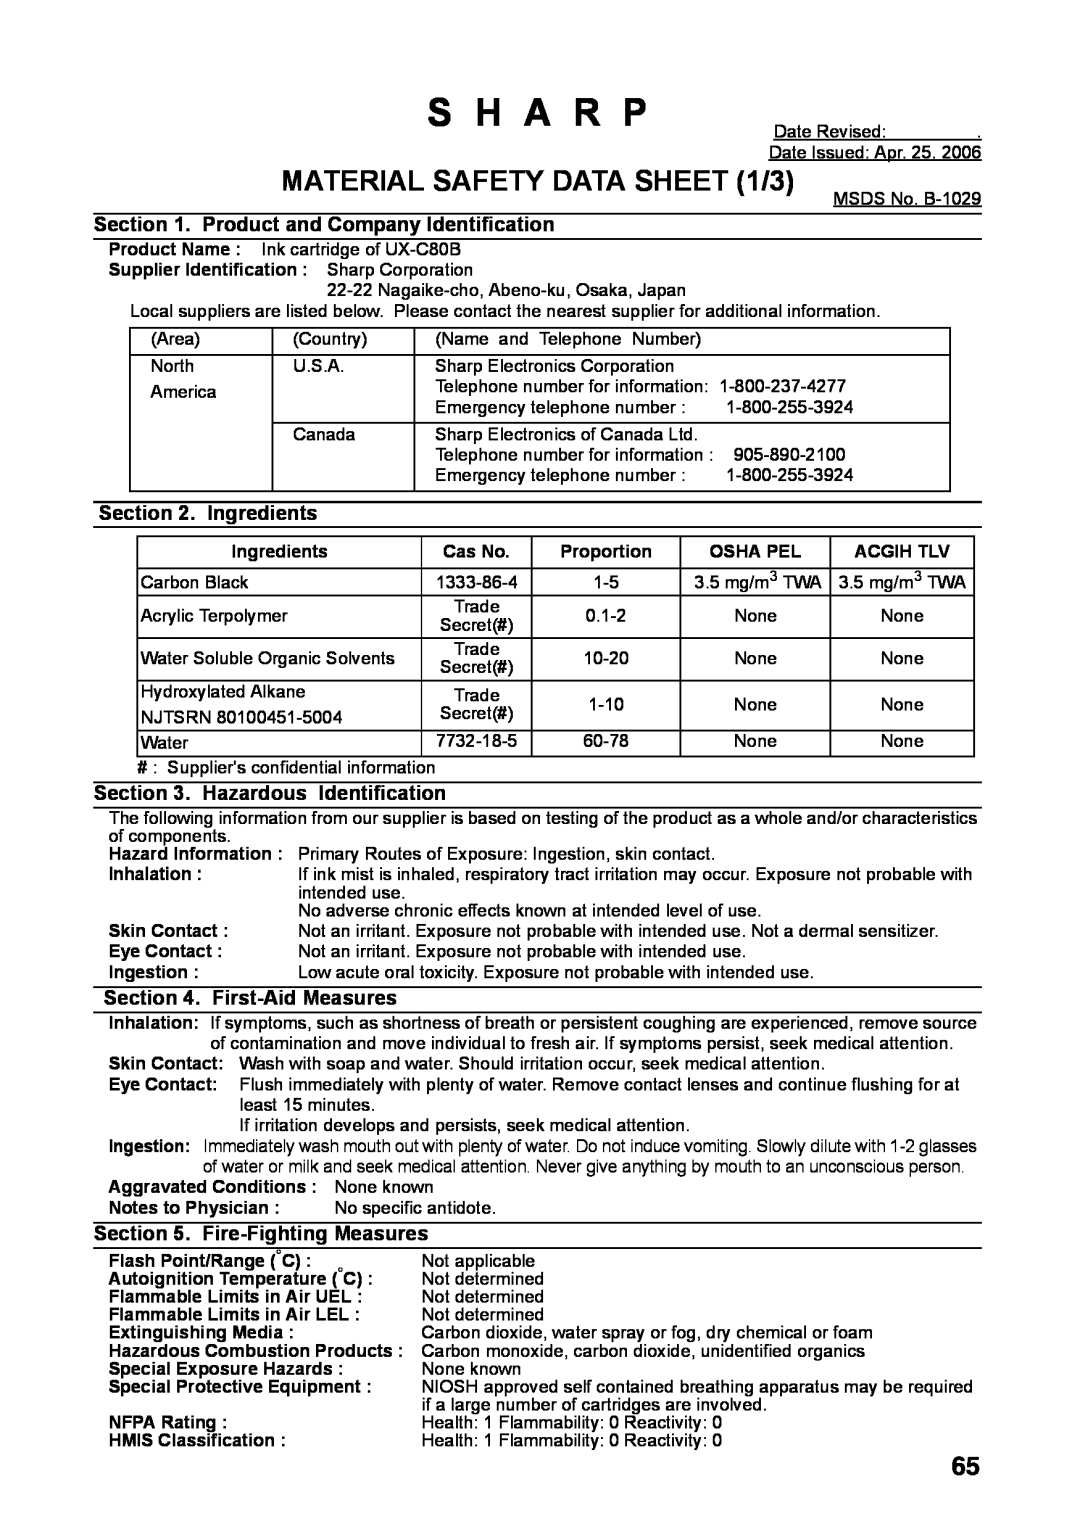 Sharp UX-B800SE operation manual S H A R P, MATERIAL SAFETY DATA SHEET 1/3, Section, Ingredients, Hazardous Identification 